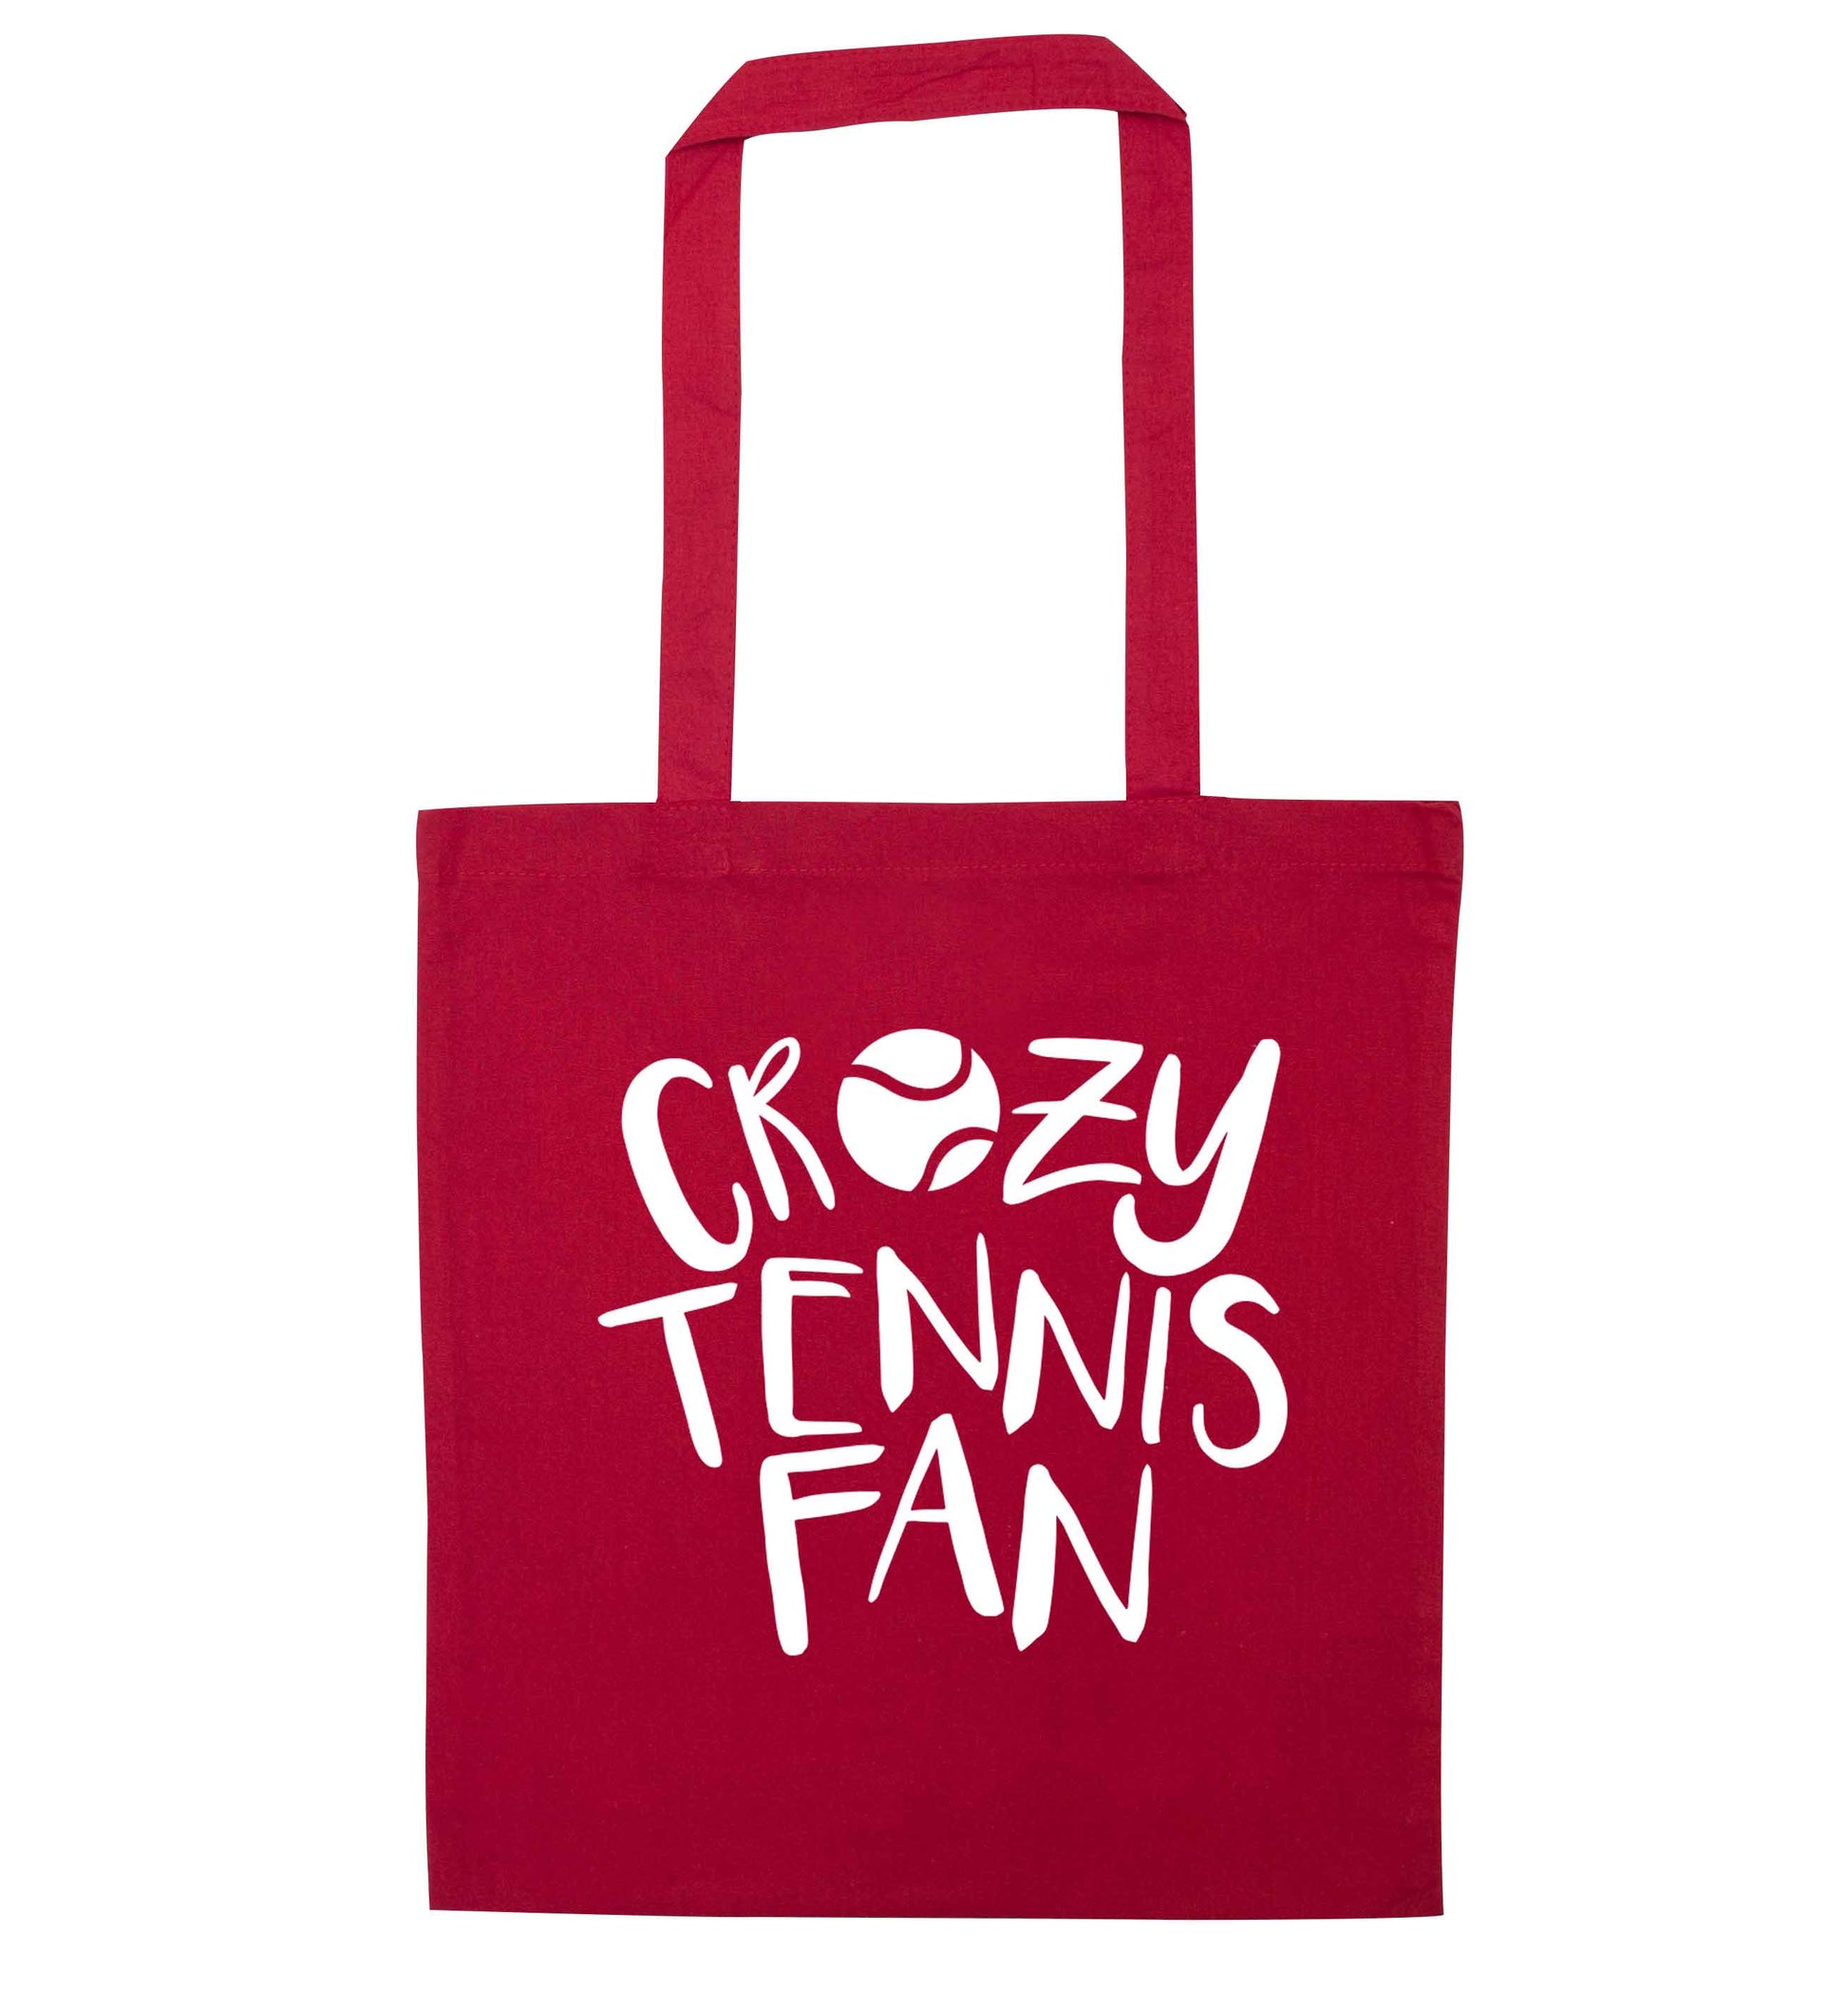 Crazy tennis fan red tote bag